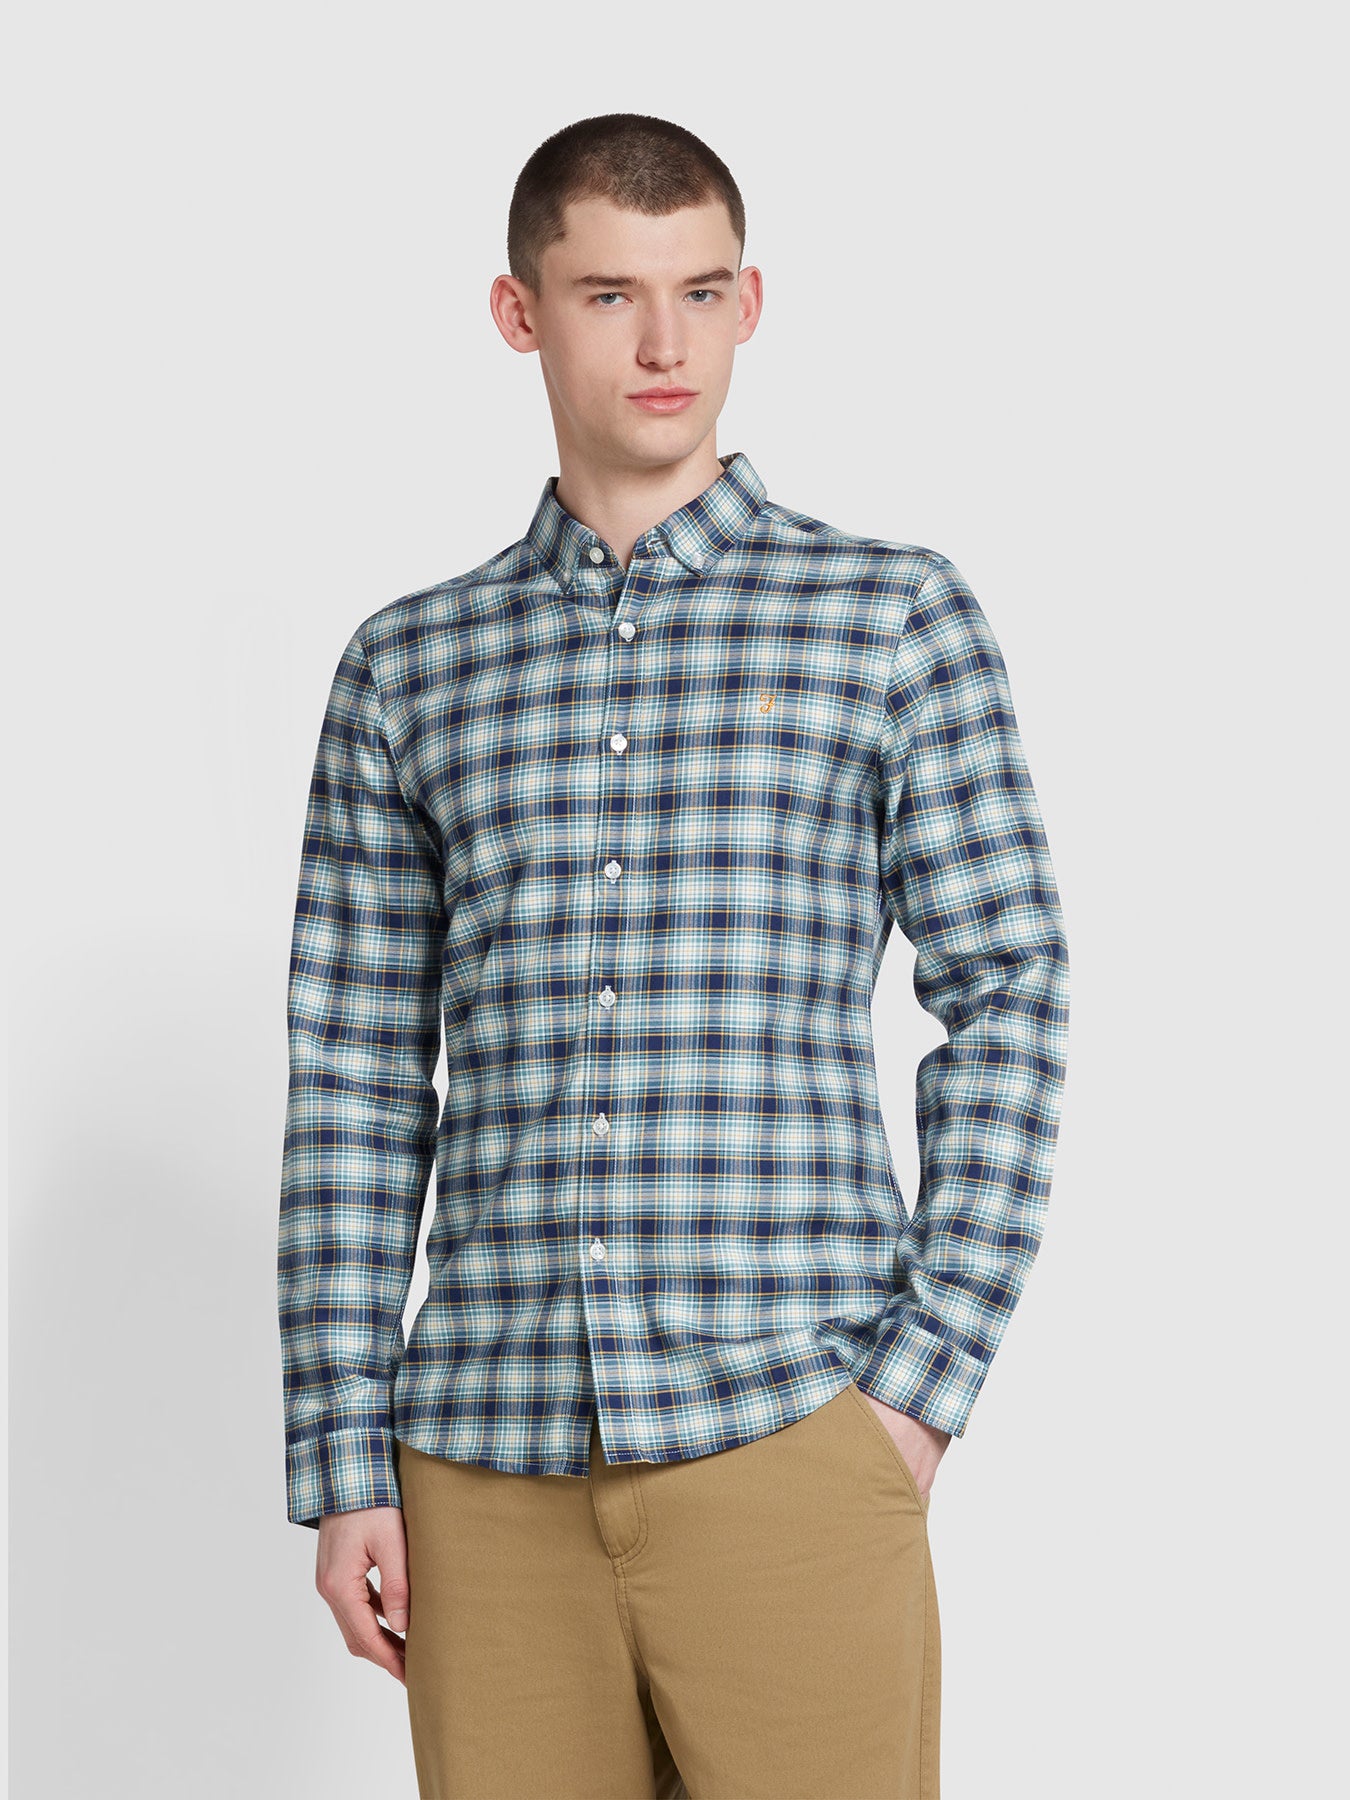 View Fraser Slim Fit Check Long Sleeve Shirt In Brook Blue information